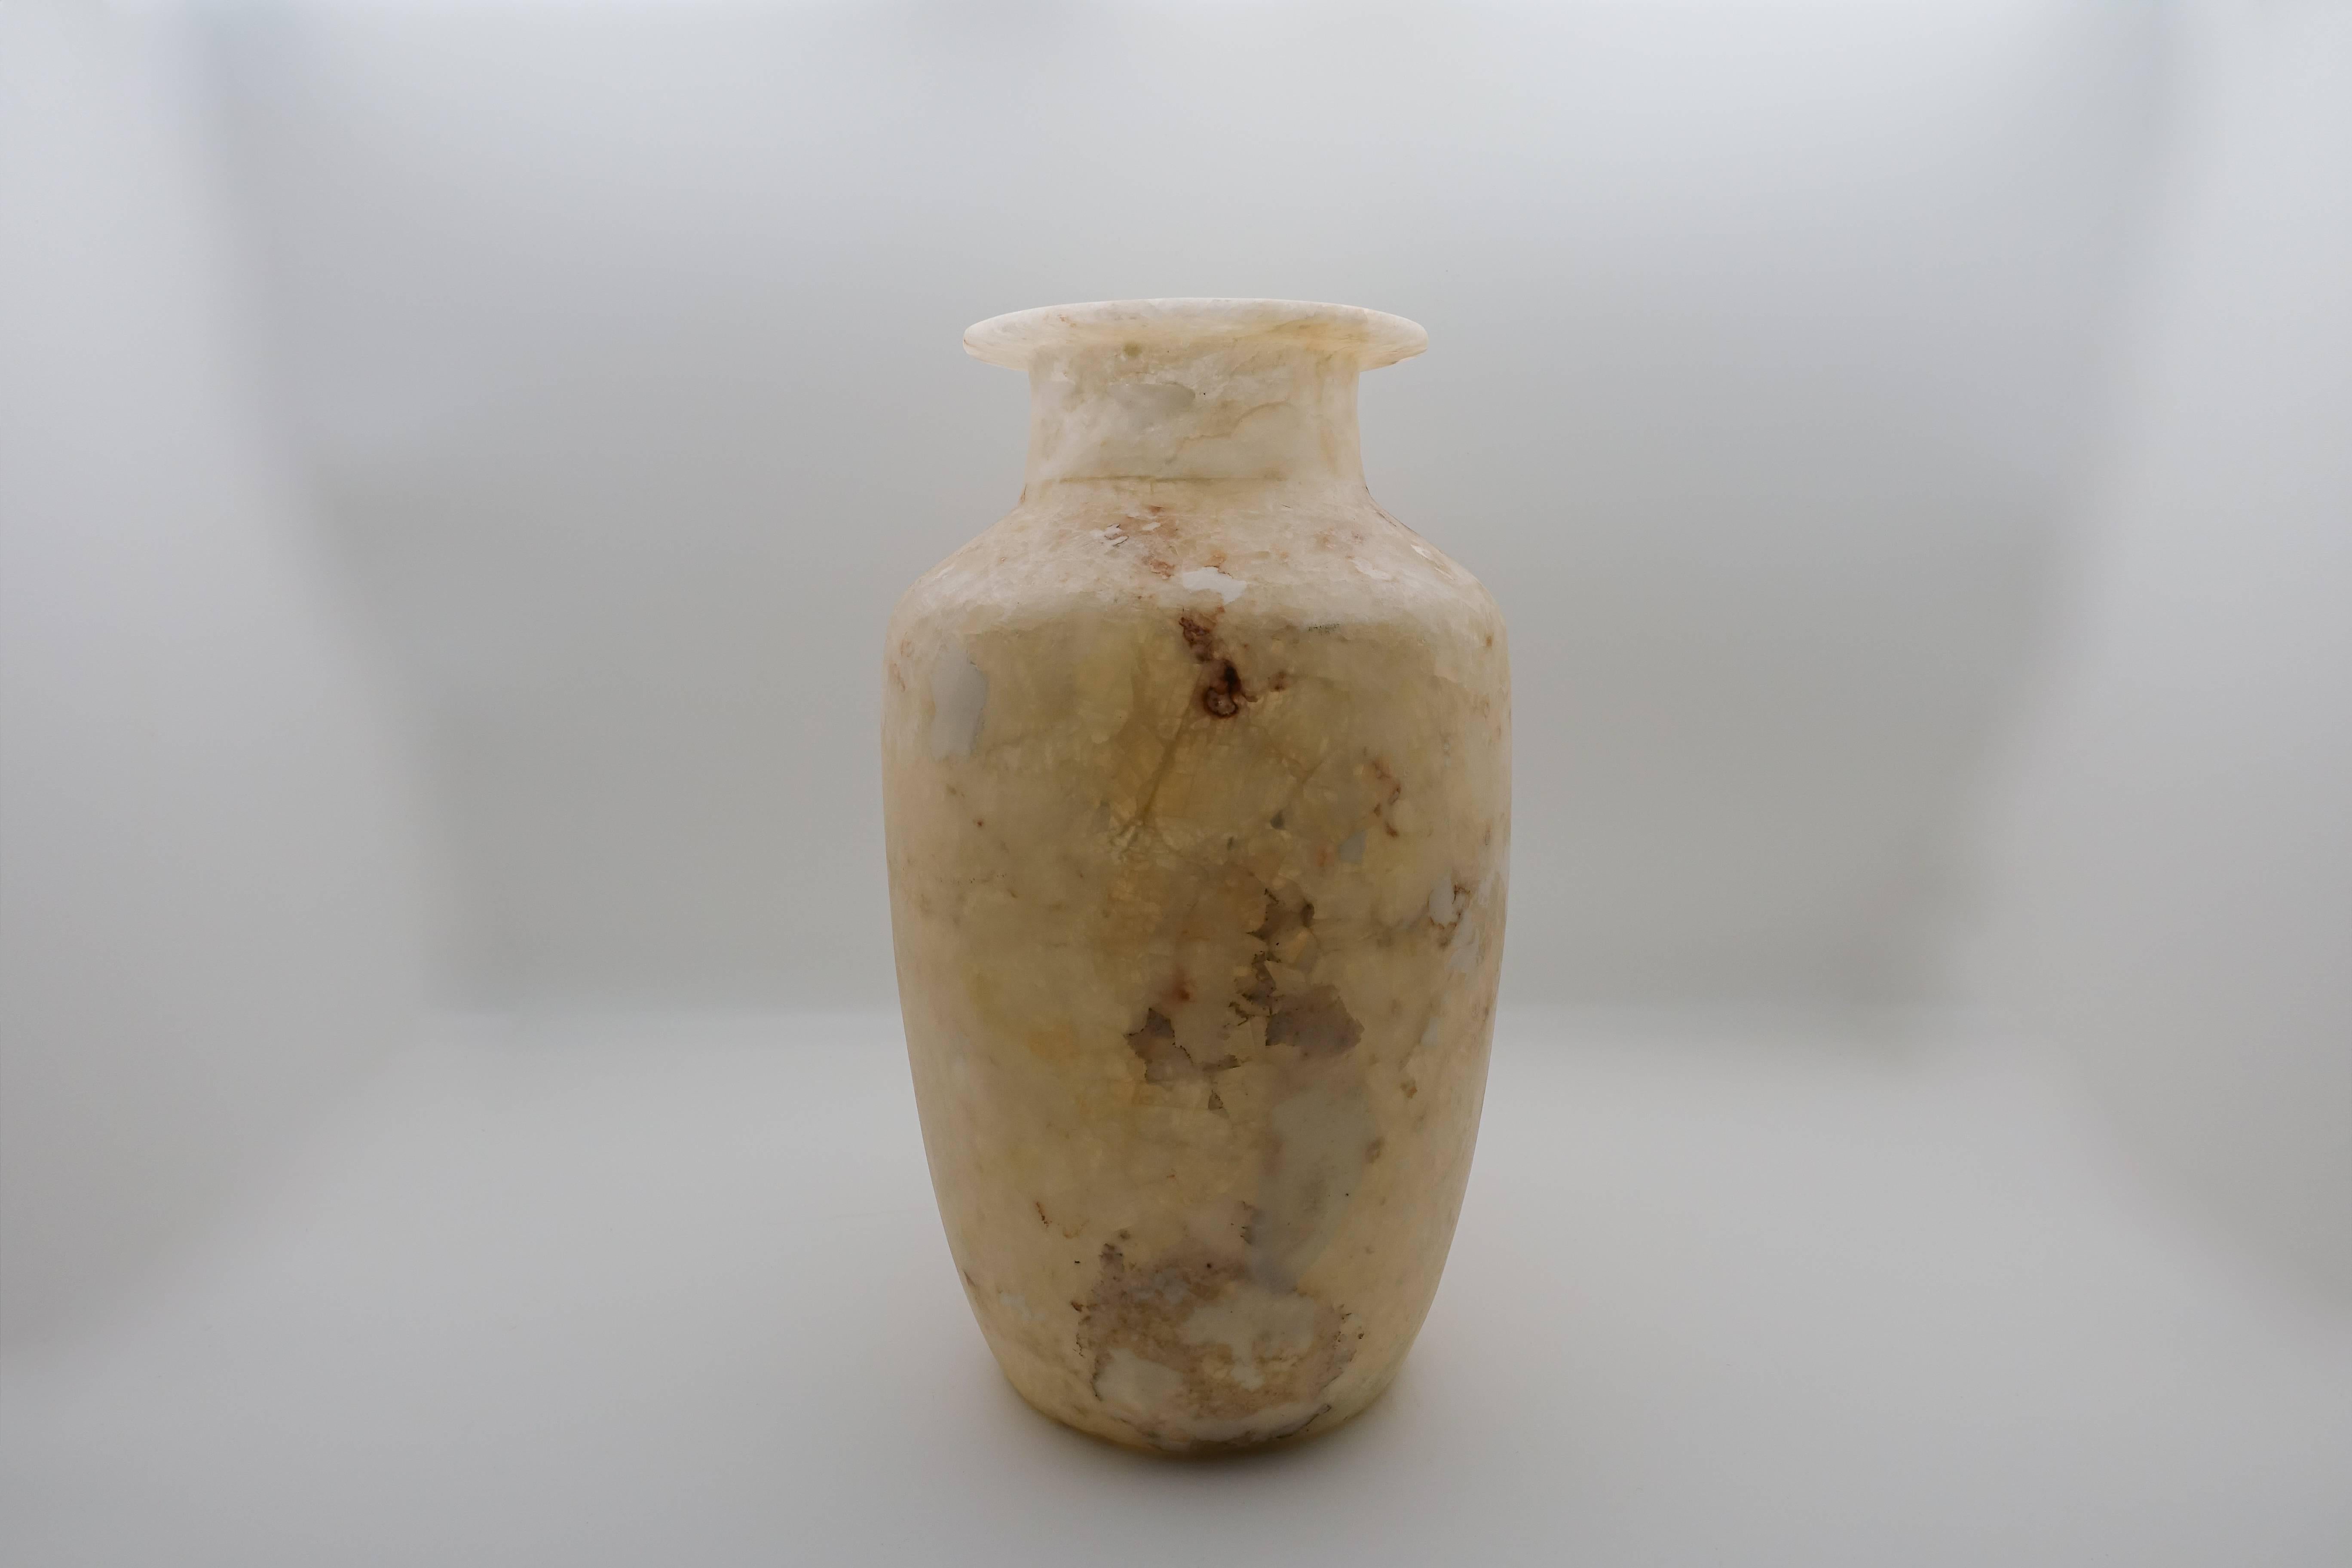 Beautifully hand-carved Egyptian alabaster vase. Techniques to carve this vase have been used by Egyptians for thousands of years. Alabaster's beauty comes from it's translucent nature that allows light to penetrate revealing it's warm natural